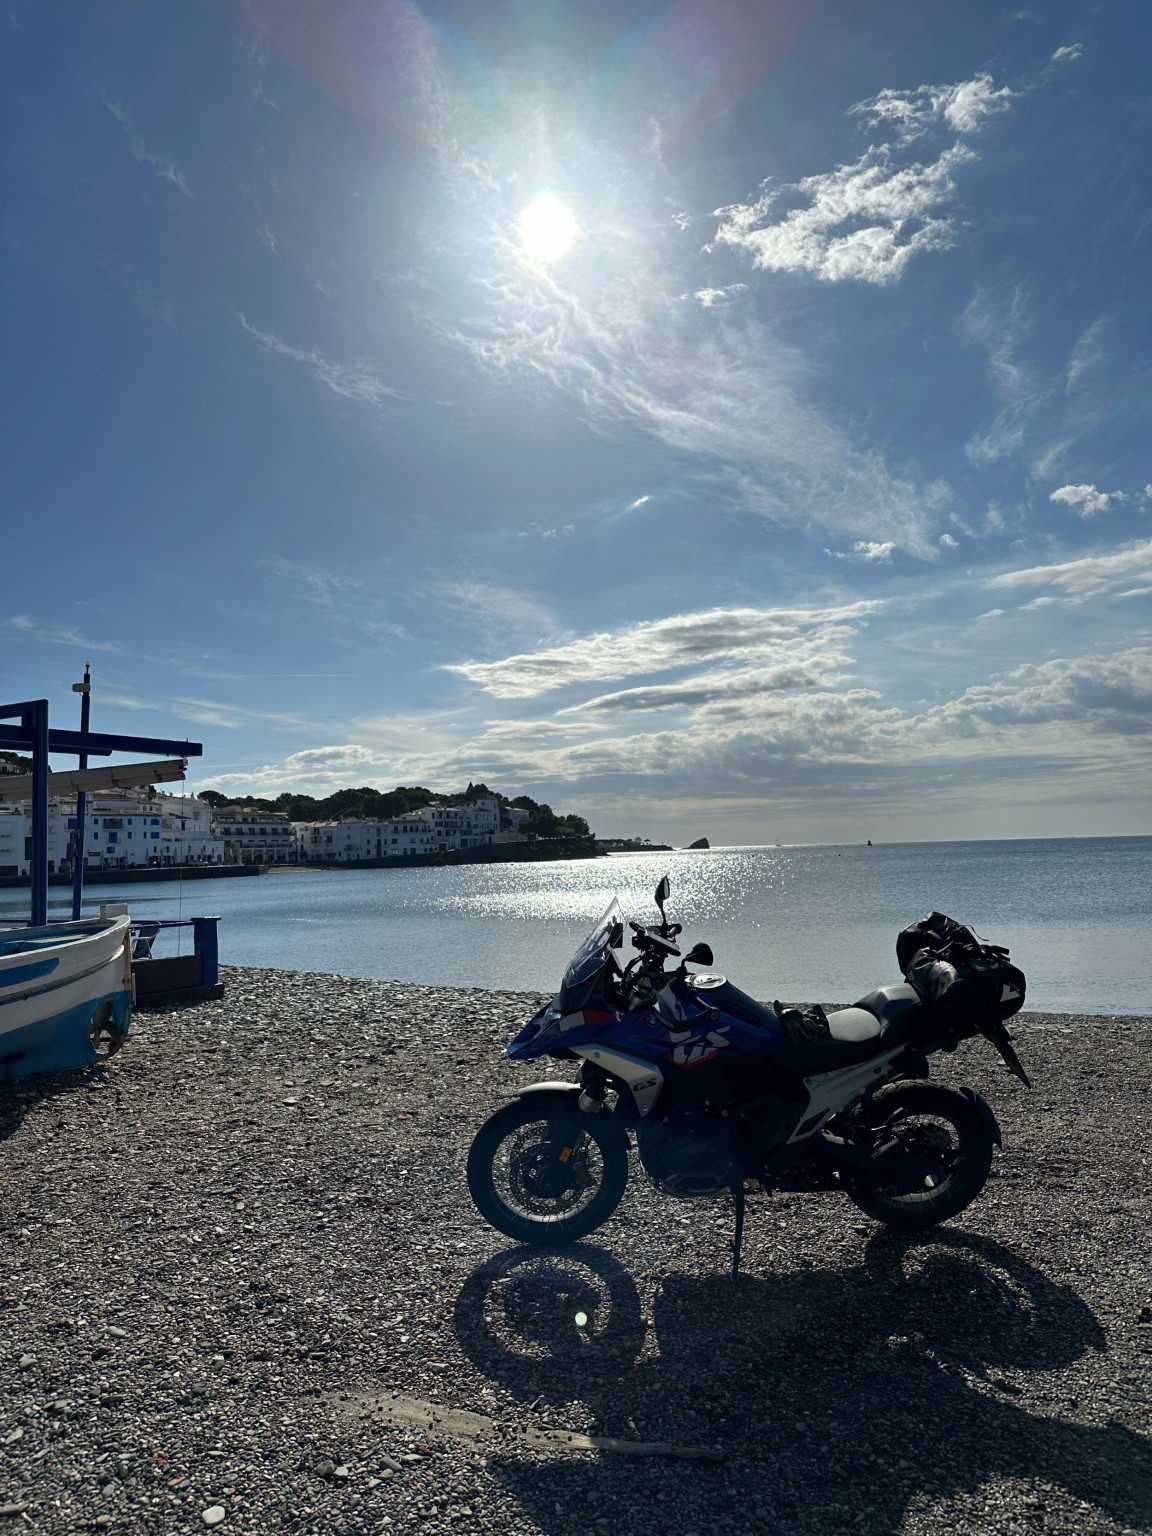 BMW R 1300 GS road test - from Barcelona to Vienna - Image 3